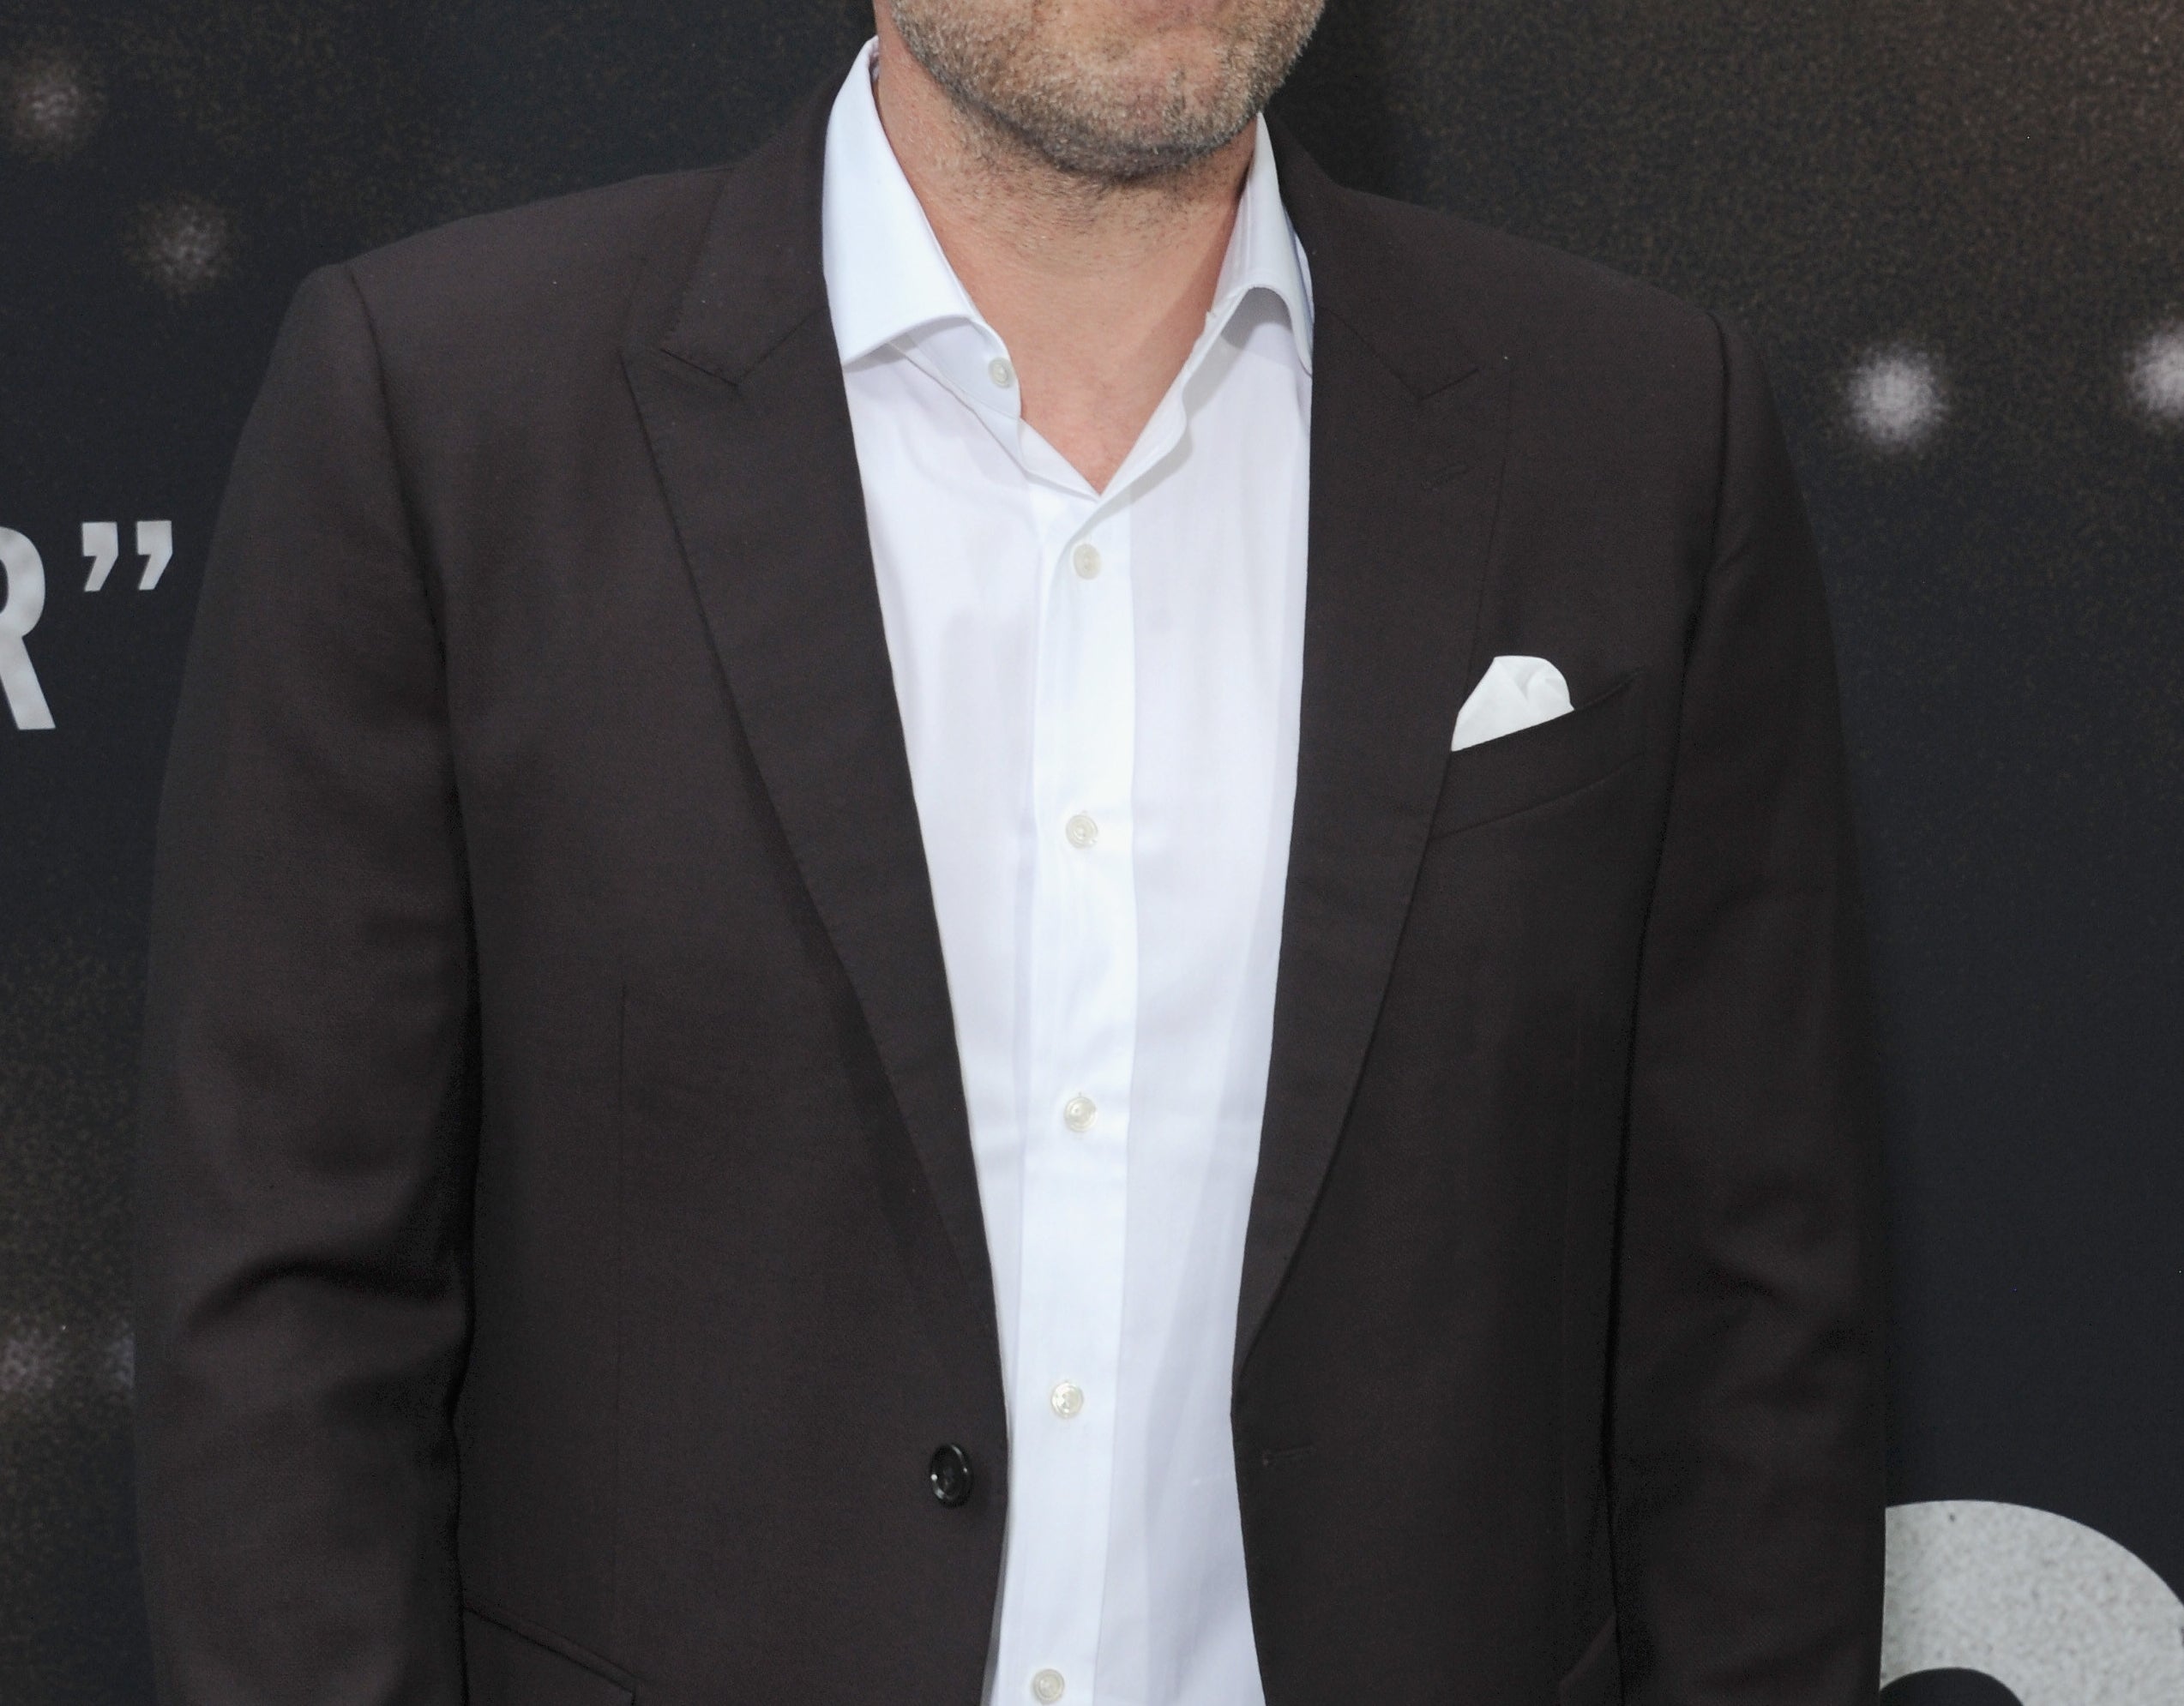 Ben smiles while attending a premiere